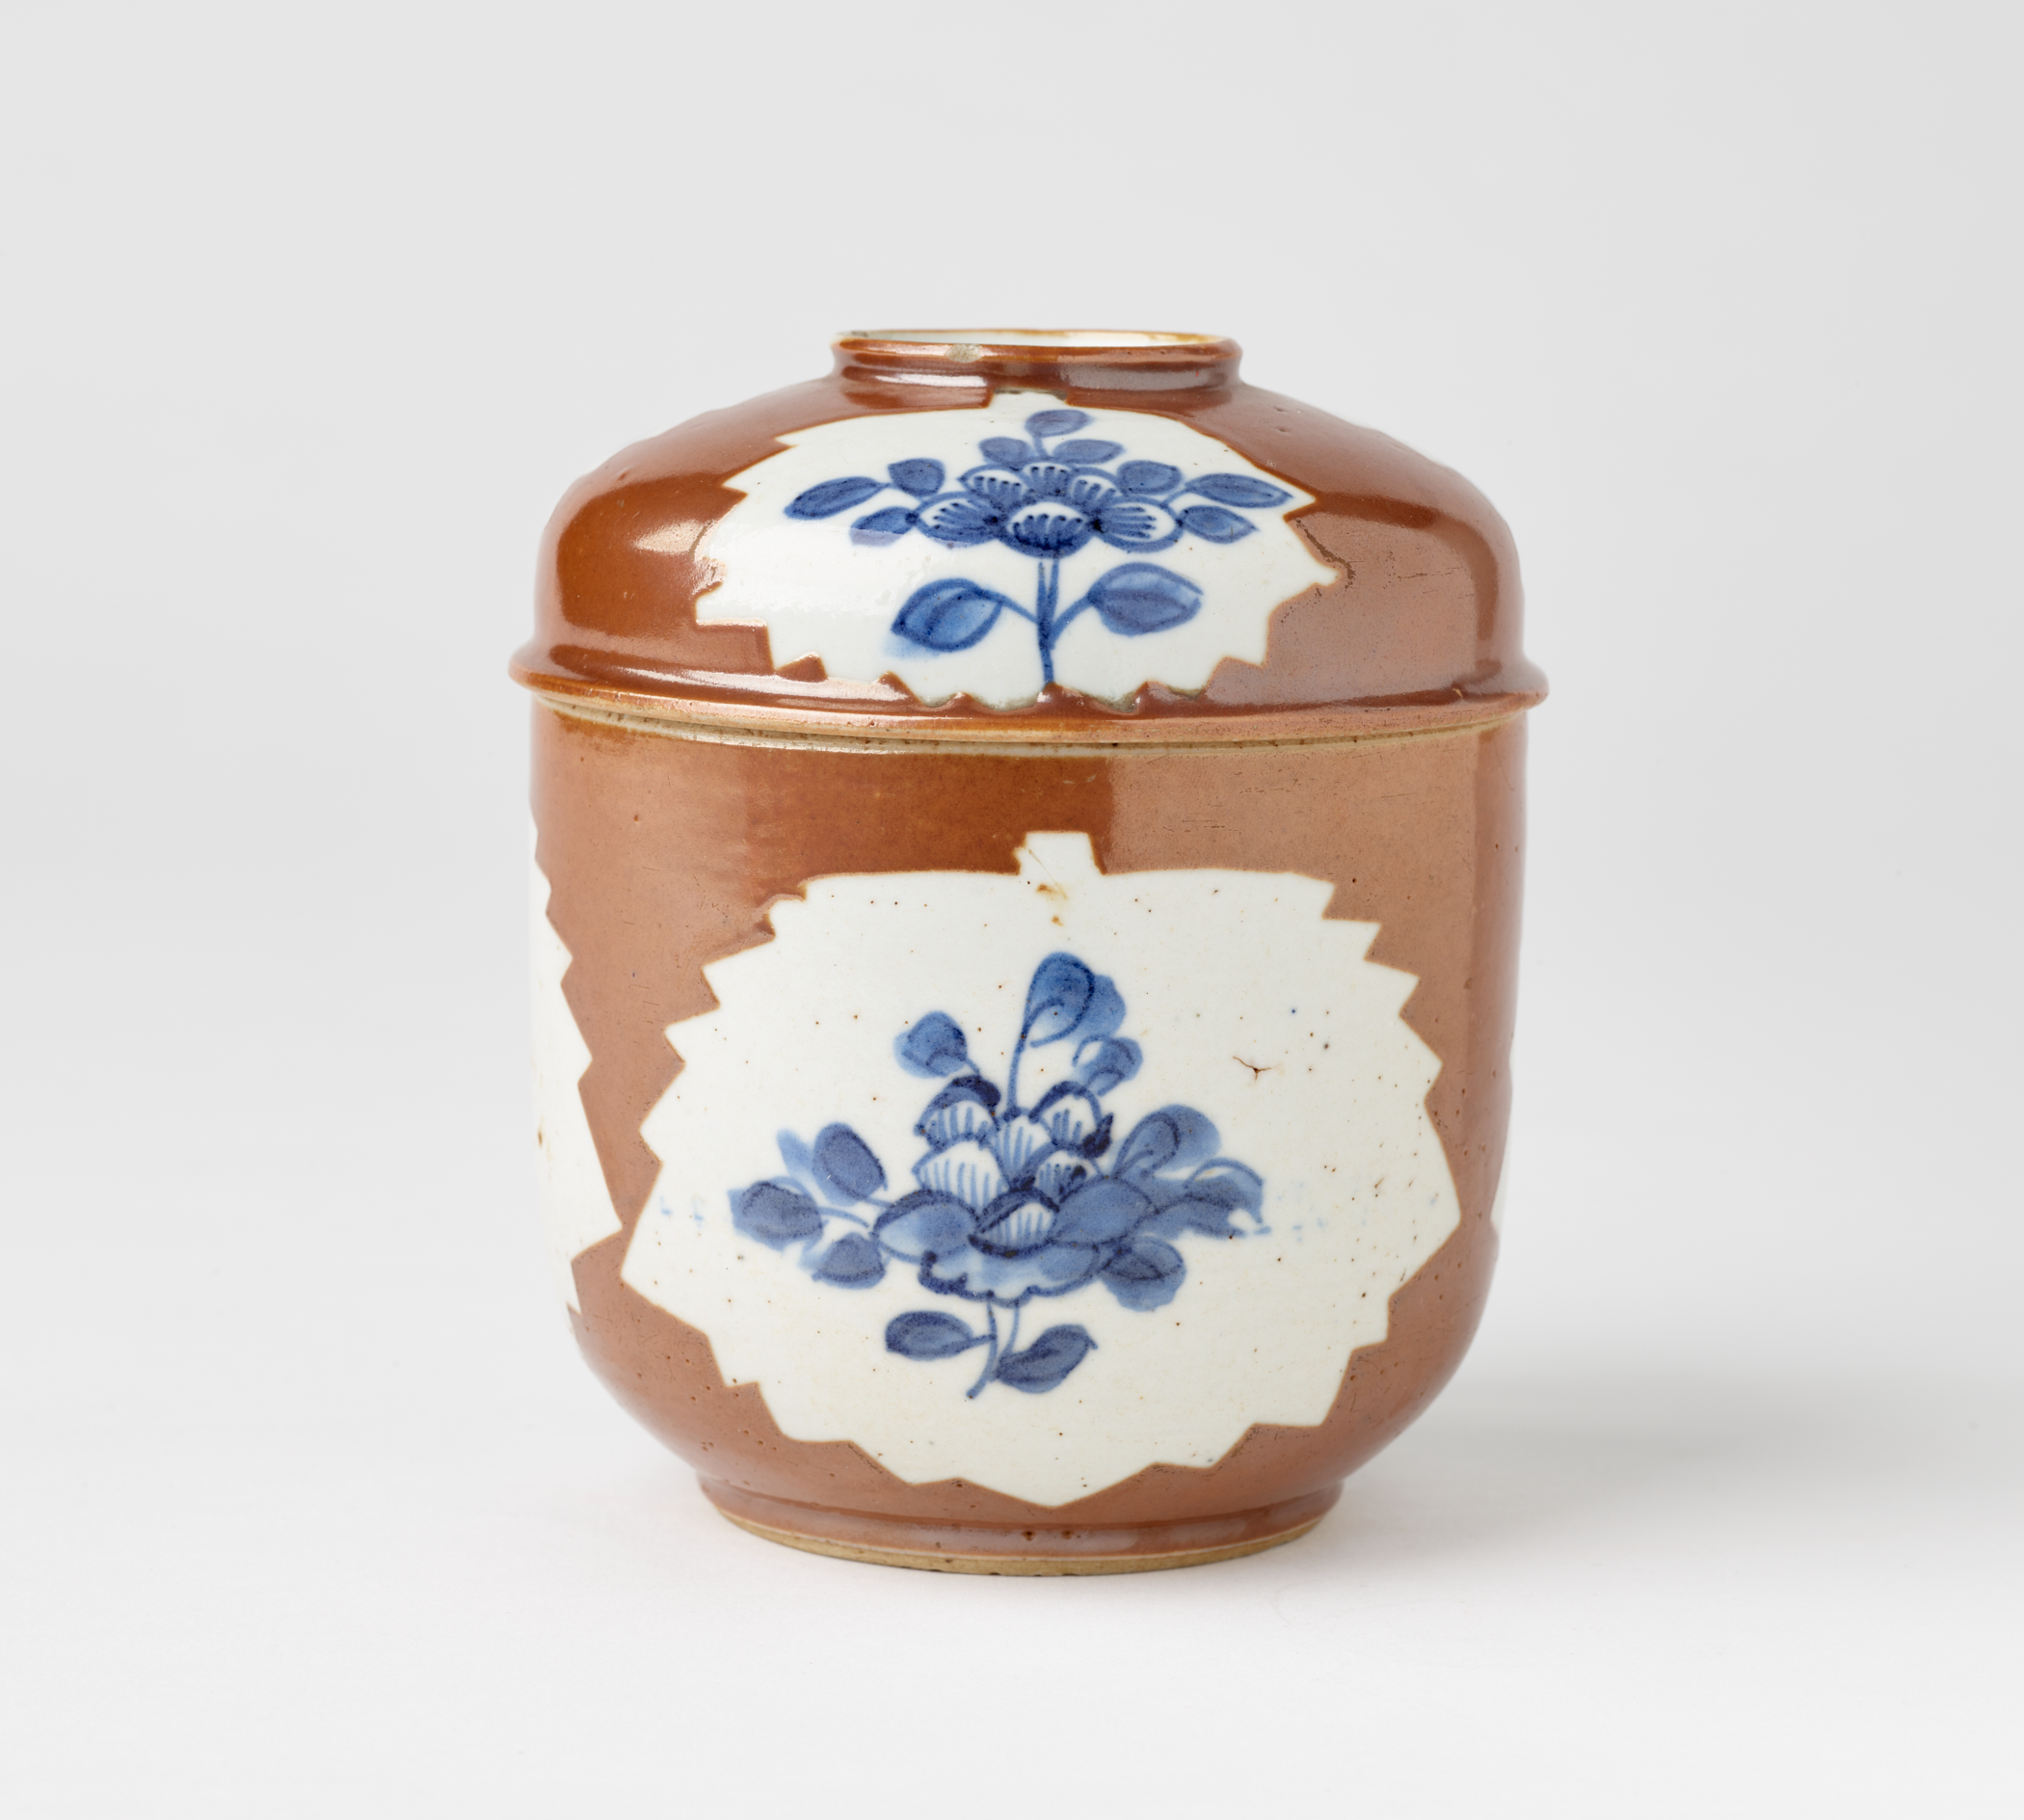 /A%20ceramic%20covered%20bowl%20that%20is%20white%2C%20brown%20and%20has%20blue%20floral%20decorations.